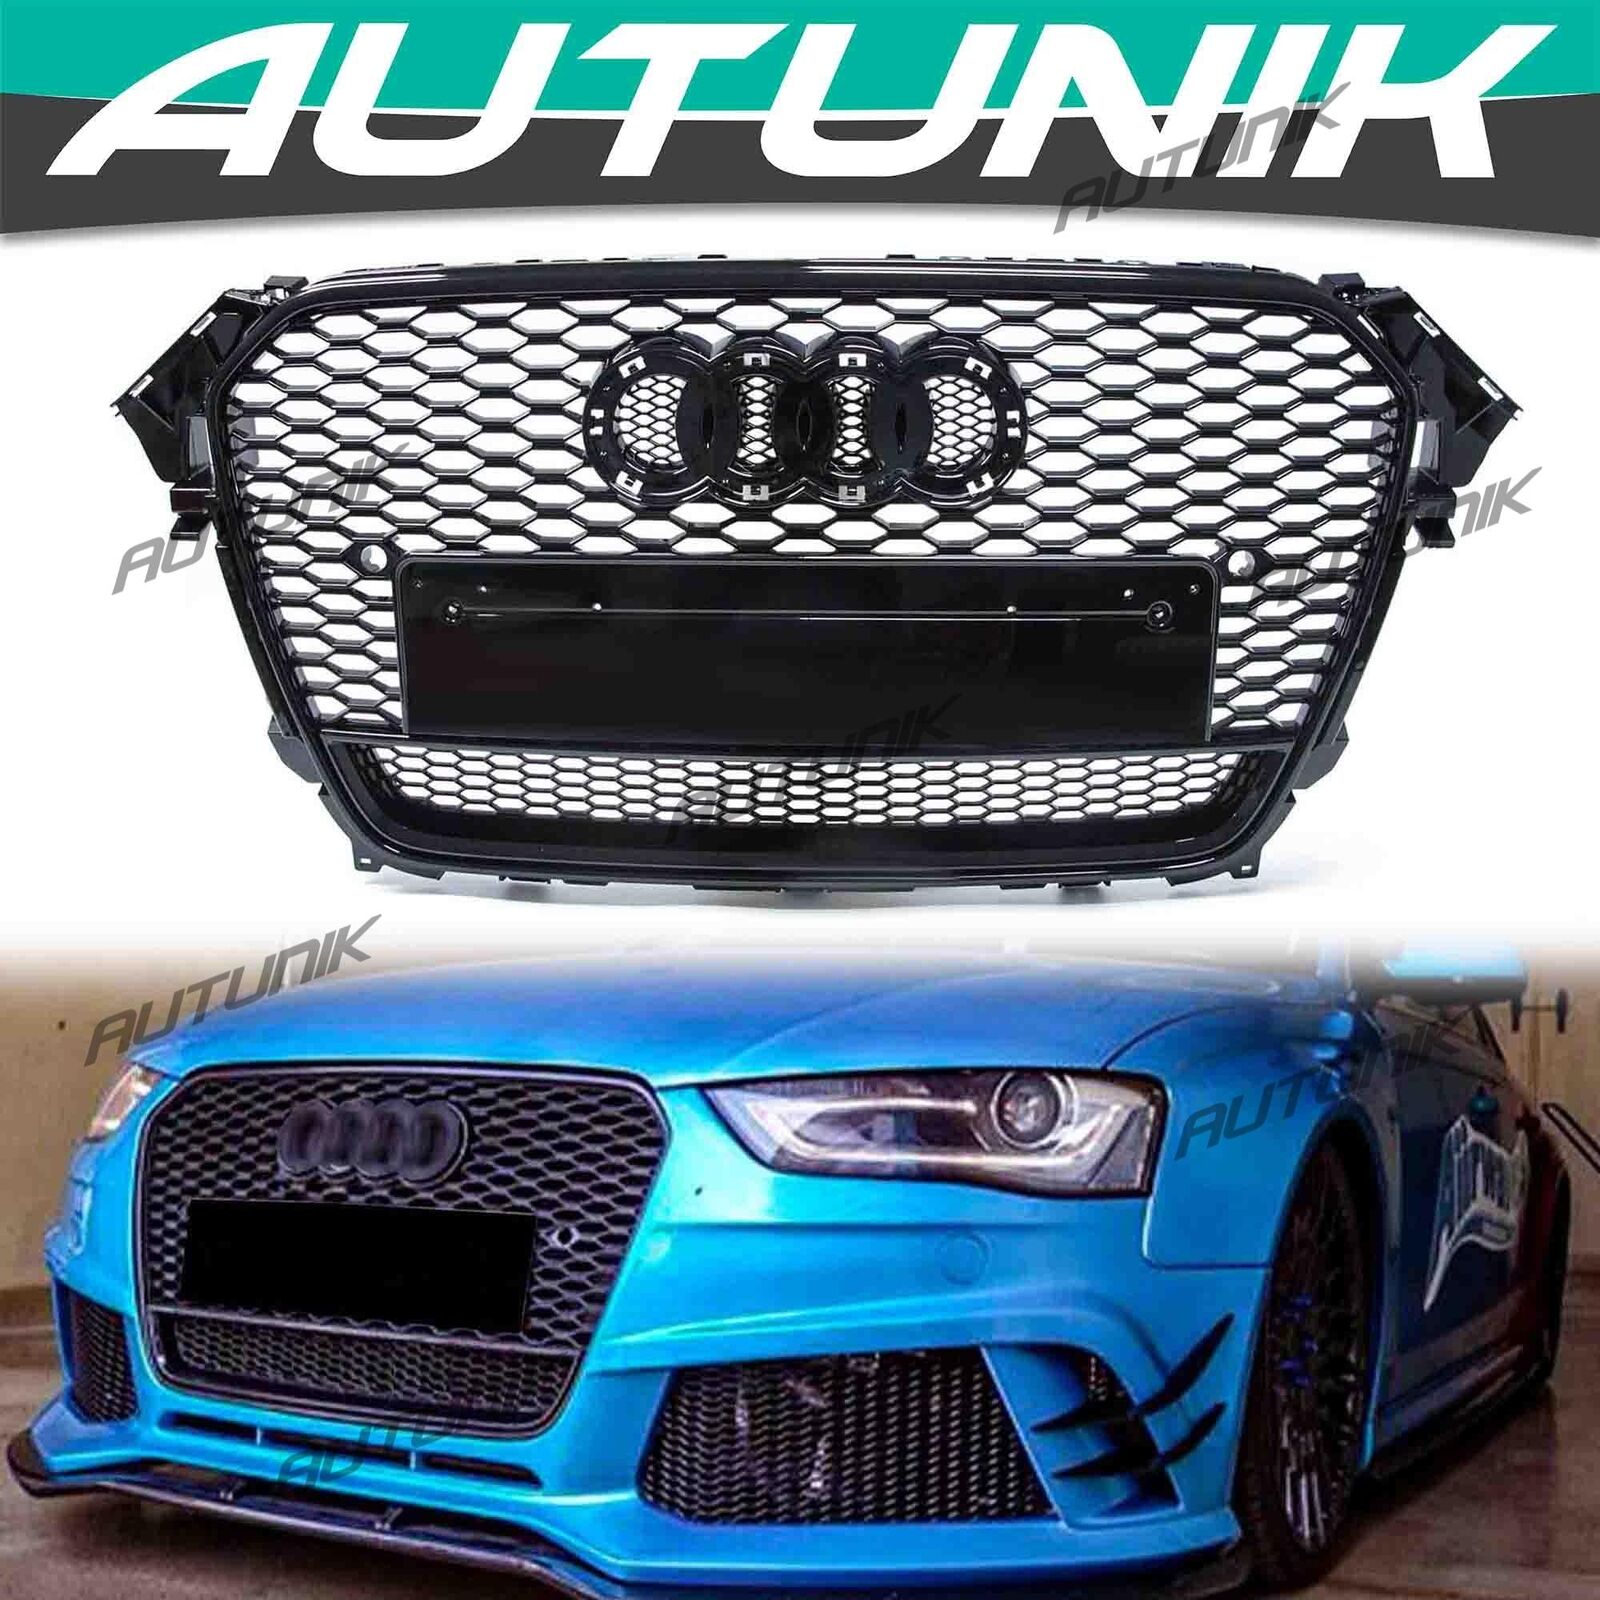 RS4 Style Honeycomb Front Mesh Grille Grill For Audi A4 S4 B8.5 2013-2015 2016